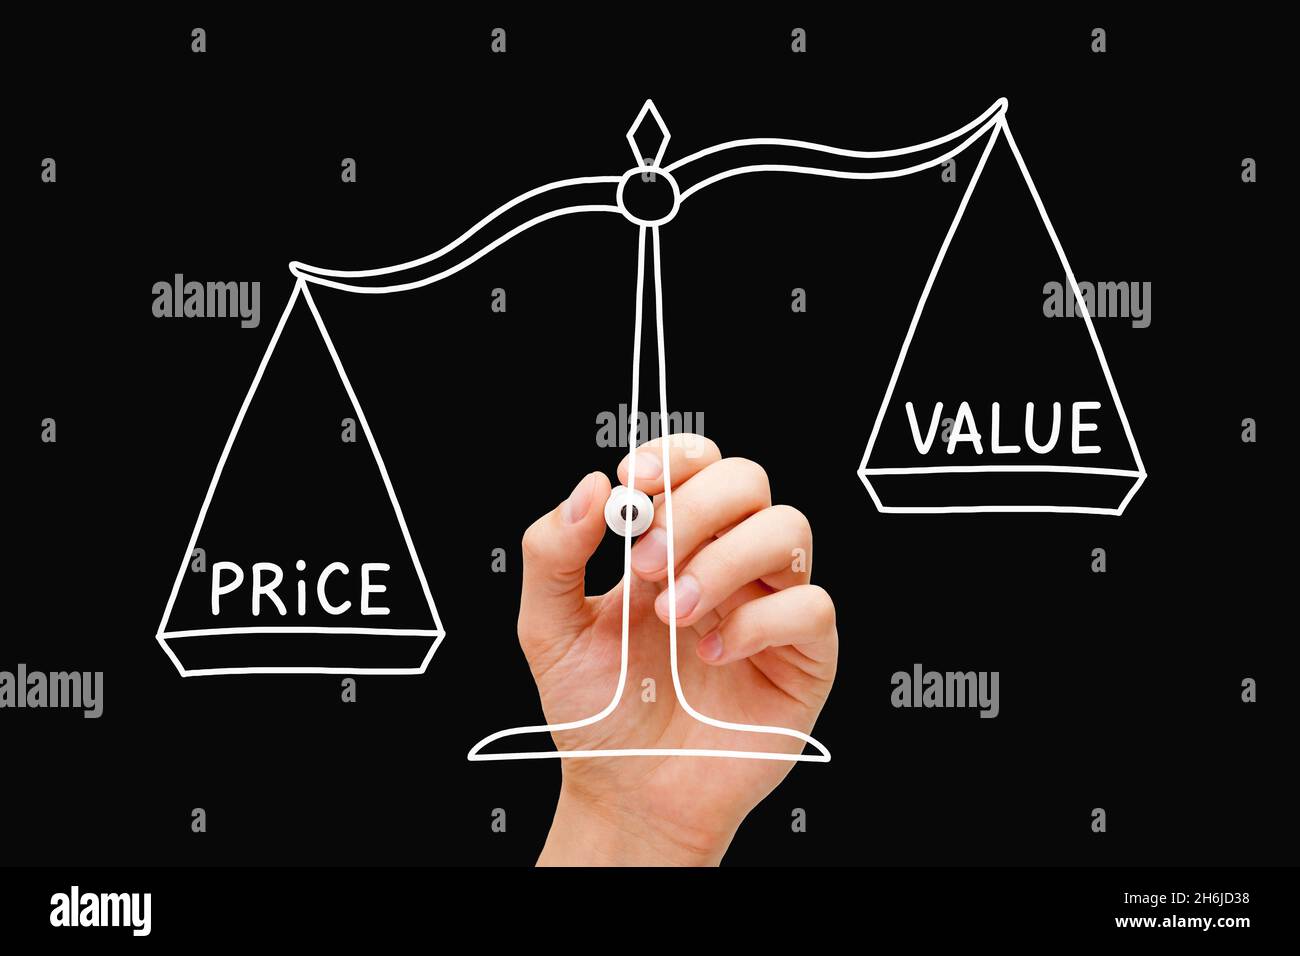 Hand drawing Price Value scale business concept with white marker isolated on black background. High price, Low value. Stock Photo